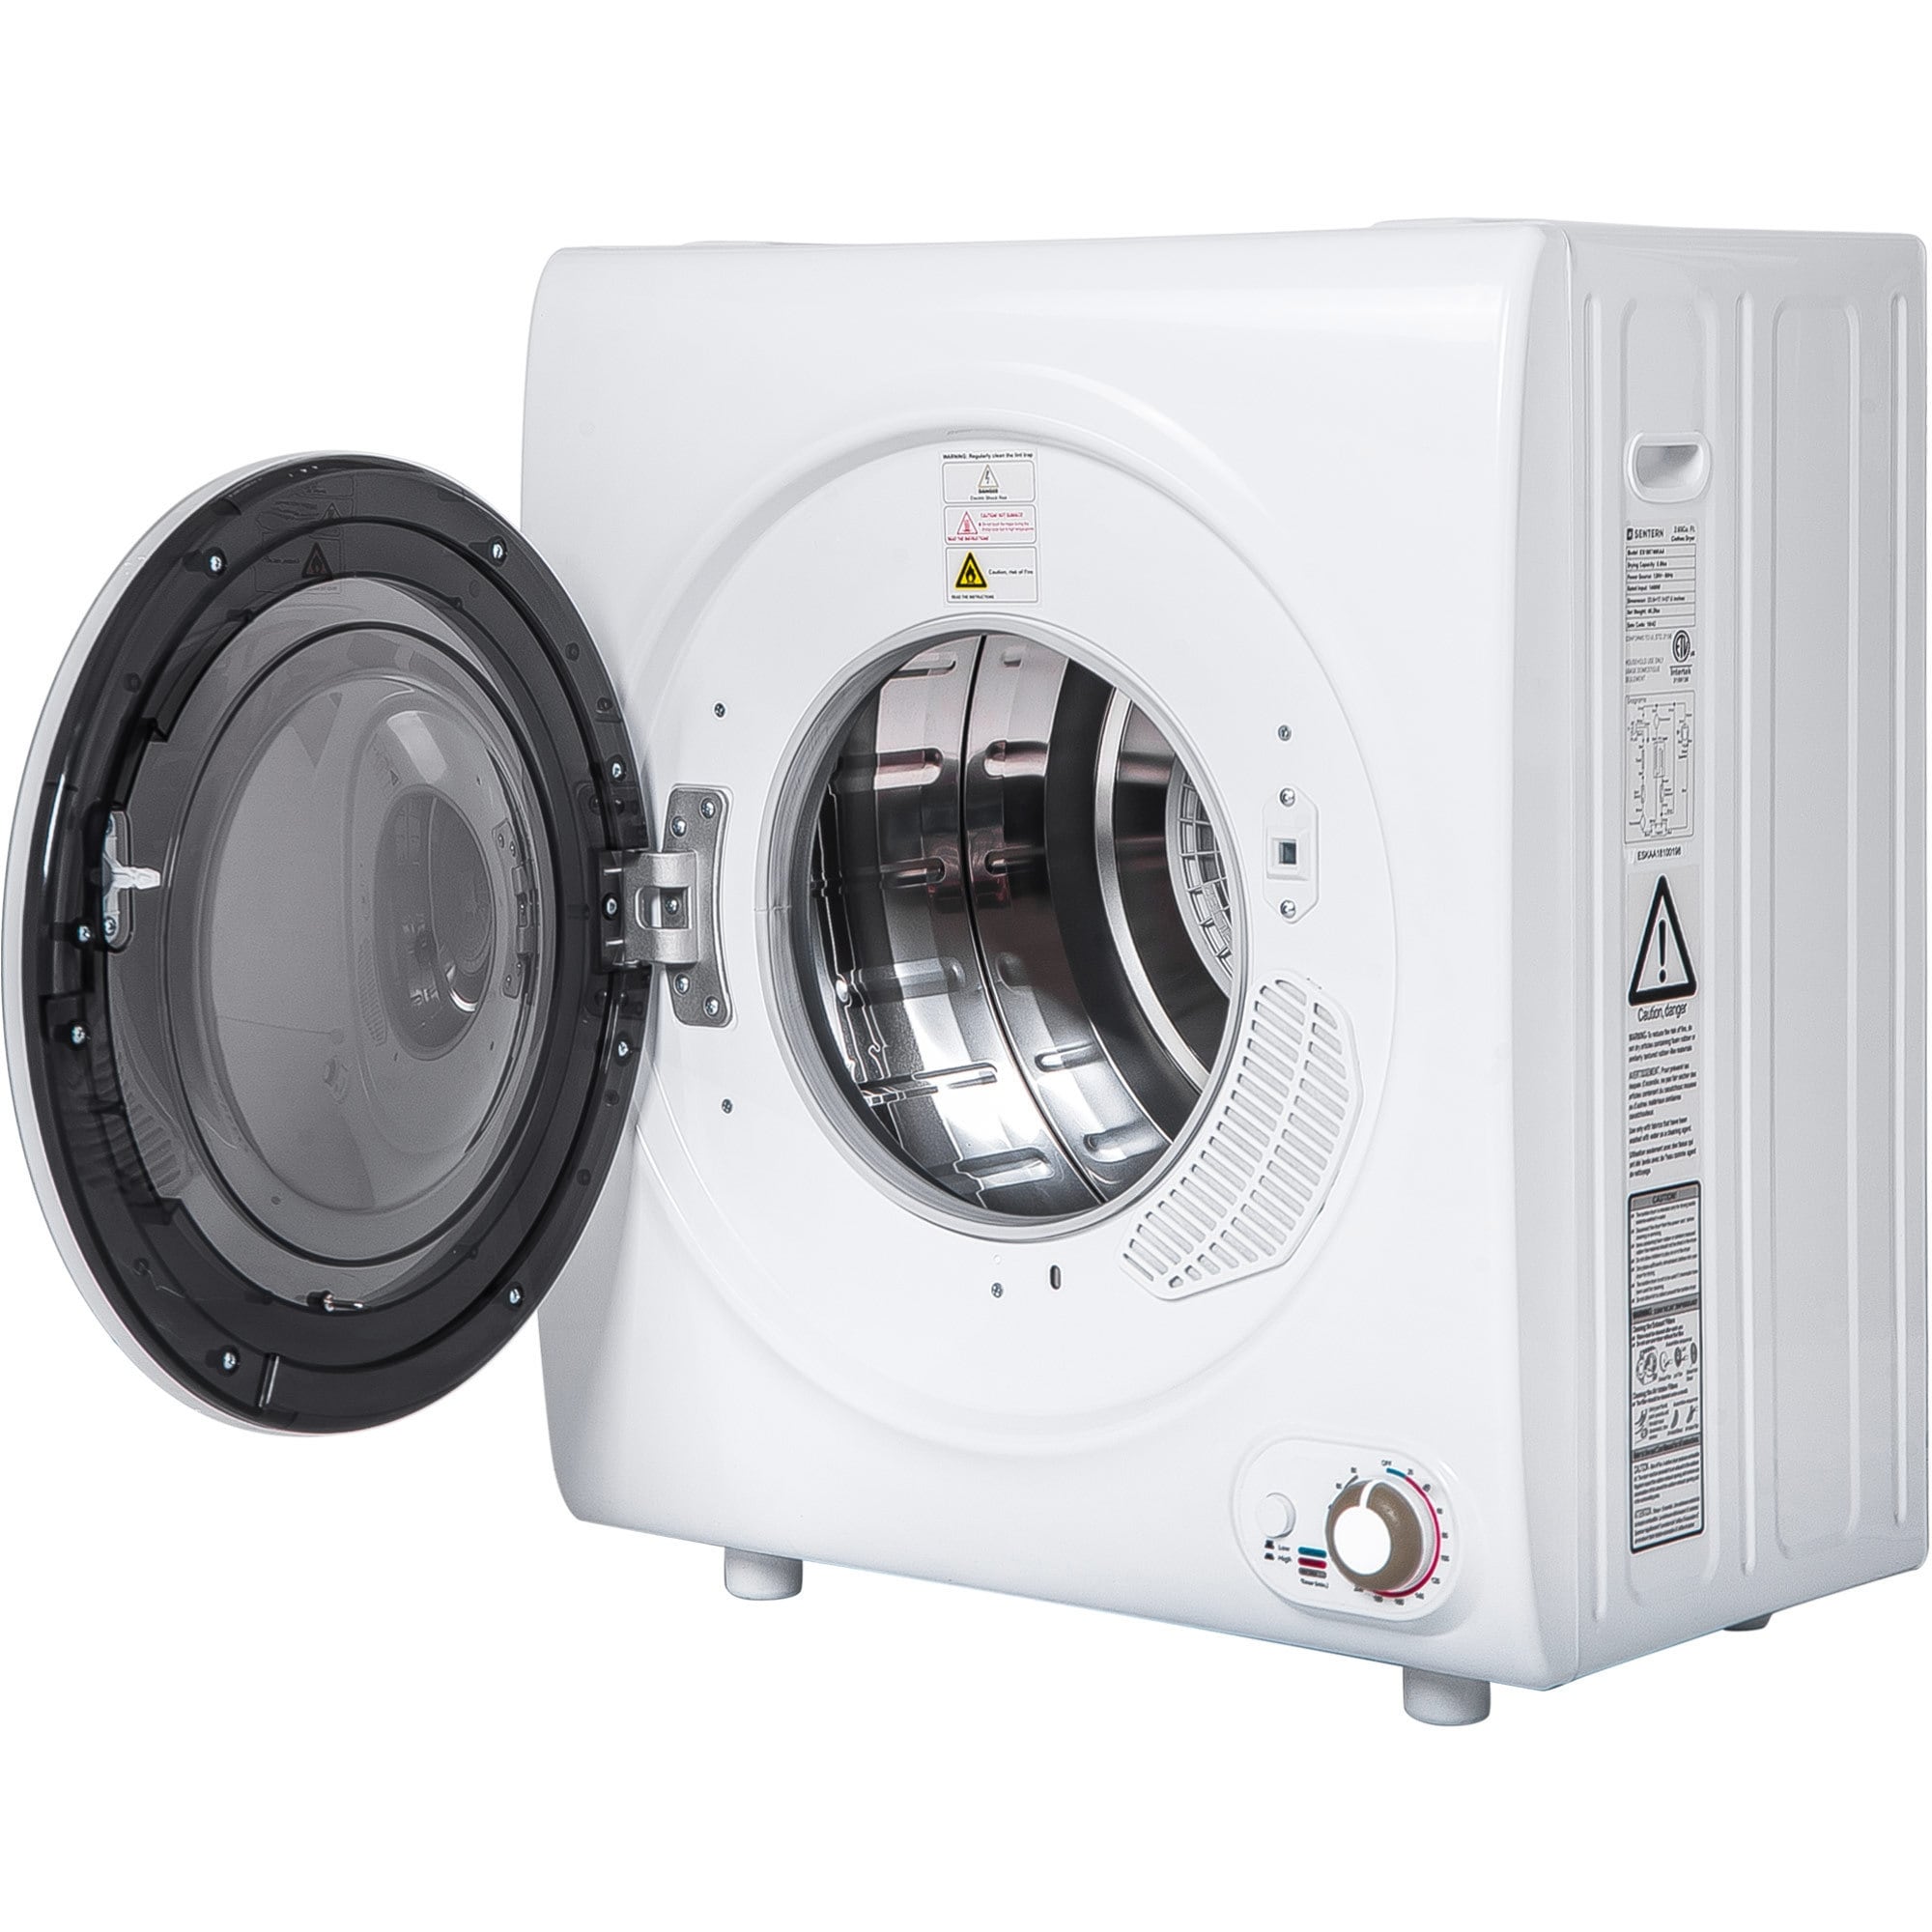 https://ak1.ostkcdn.com/images/products/is/images/direct/6d50eeb16ba407a8c83dc4d4ae4954b35ad389d4/2.65-Cu.-Ft.-Compact-Laundry-Dryer%3B-9-lbs-Capacity-Tumbler%2C-1400-W-of-Drying-Power%3B.jpg